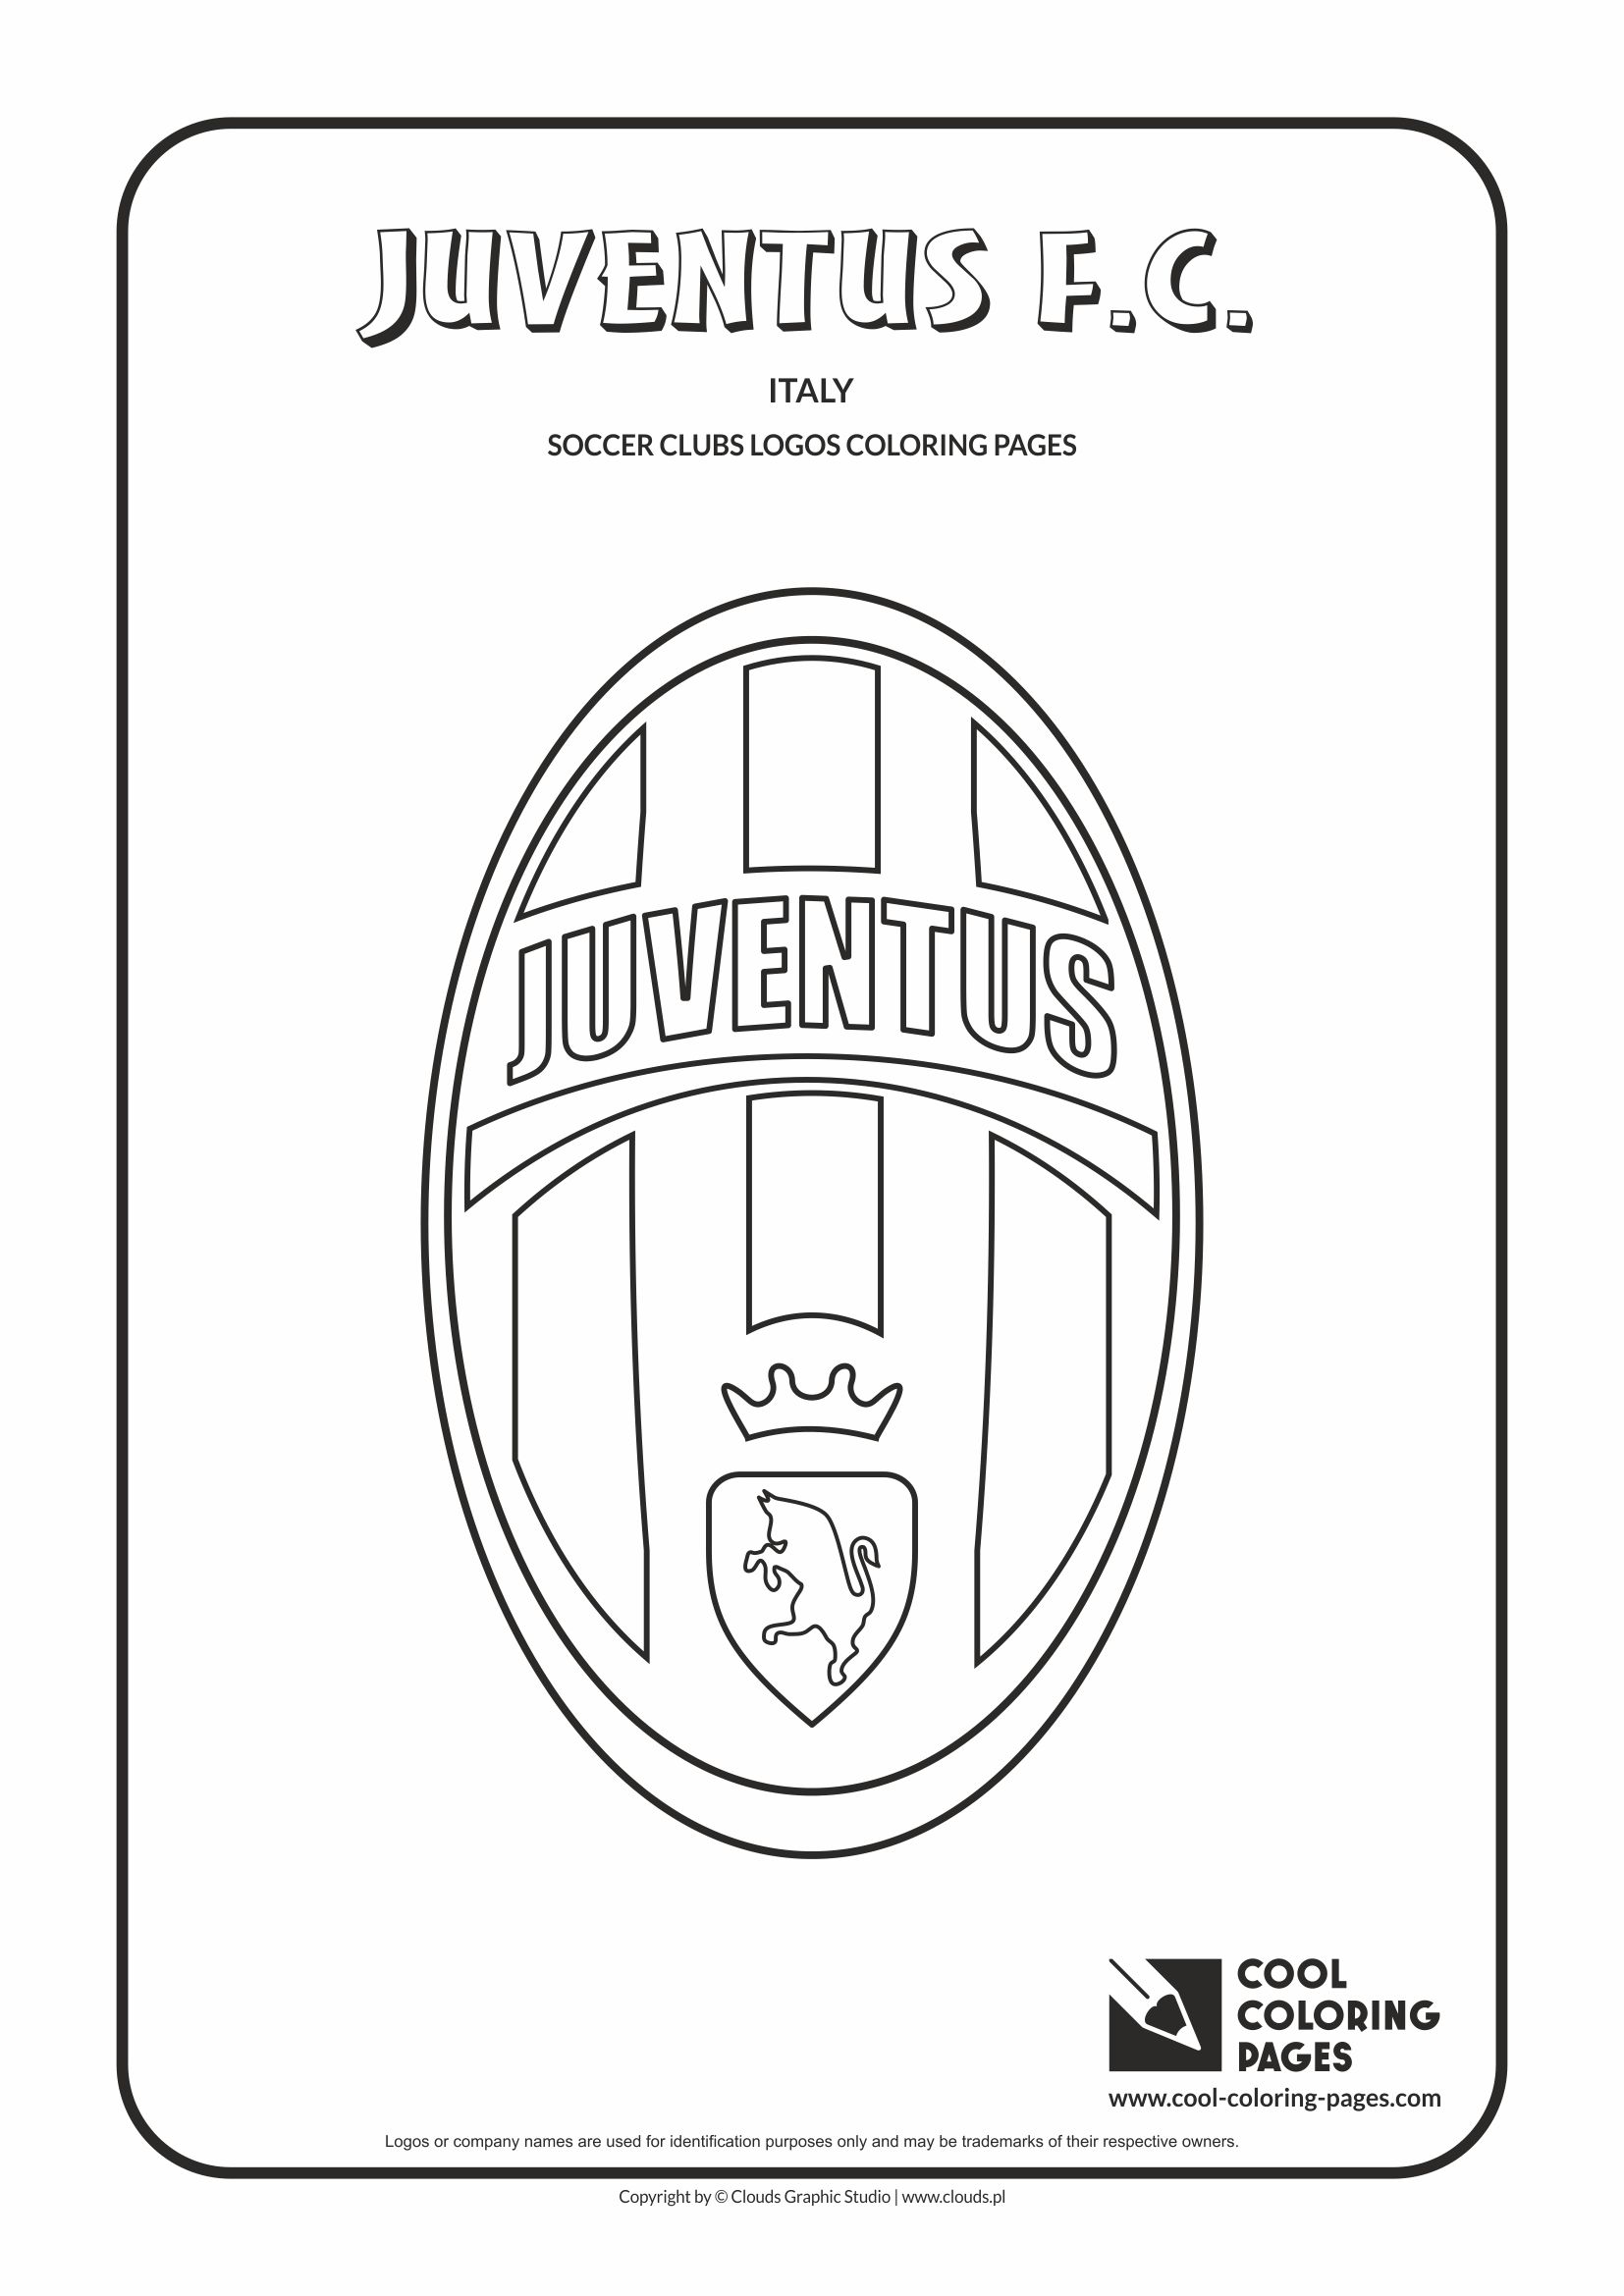 Cool Coloring Pages Juventus F.C. logo coloring page - Cool Coloring